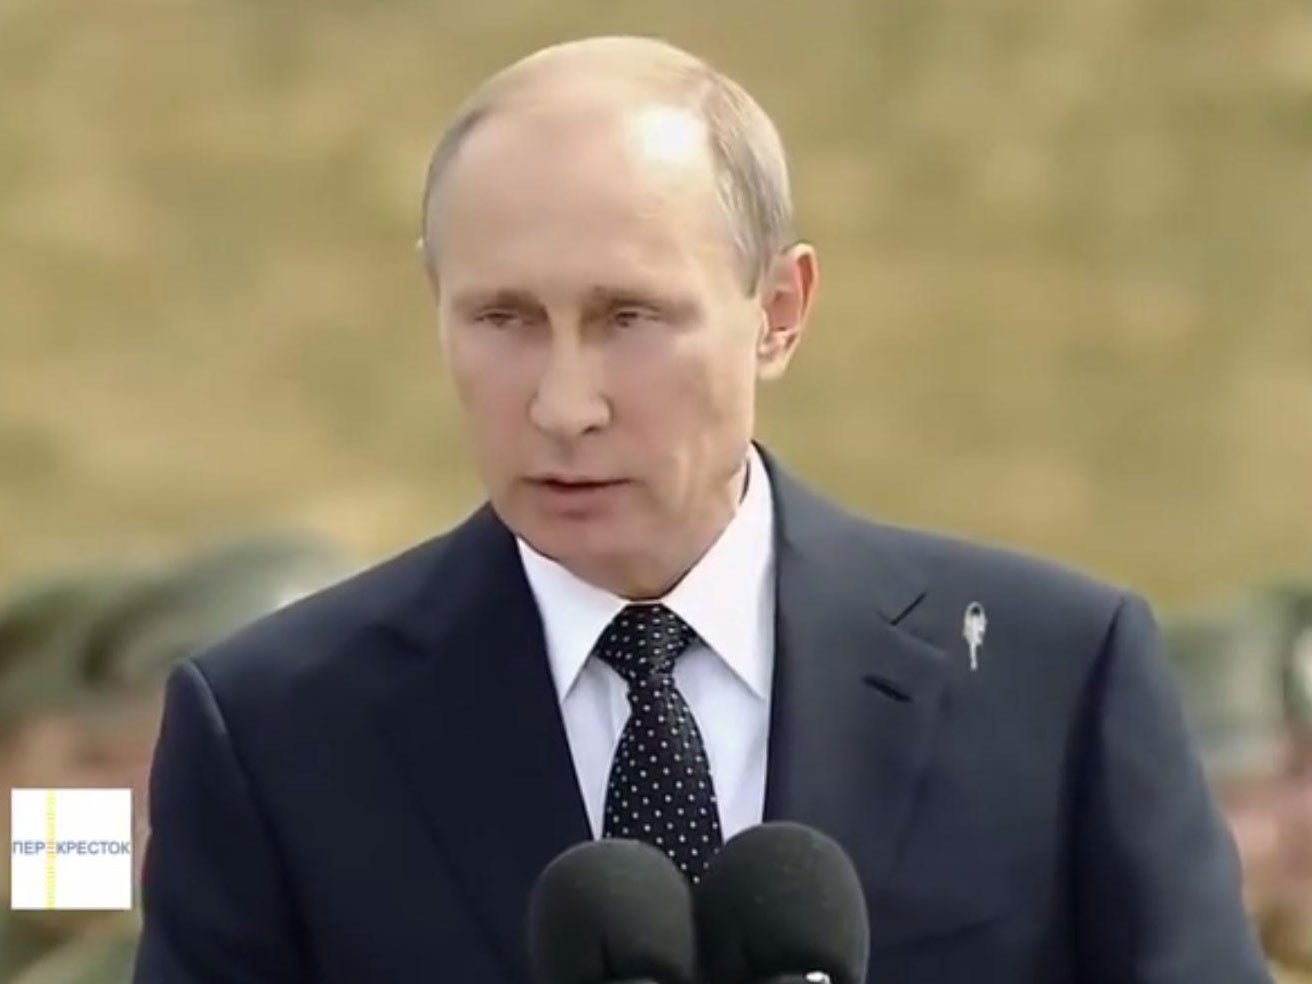 Footage of Putin getting pooped on by a bird appears to be fake